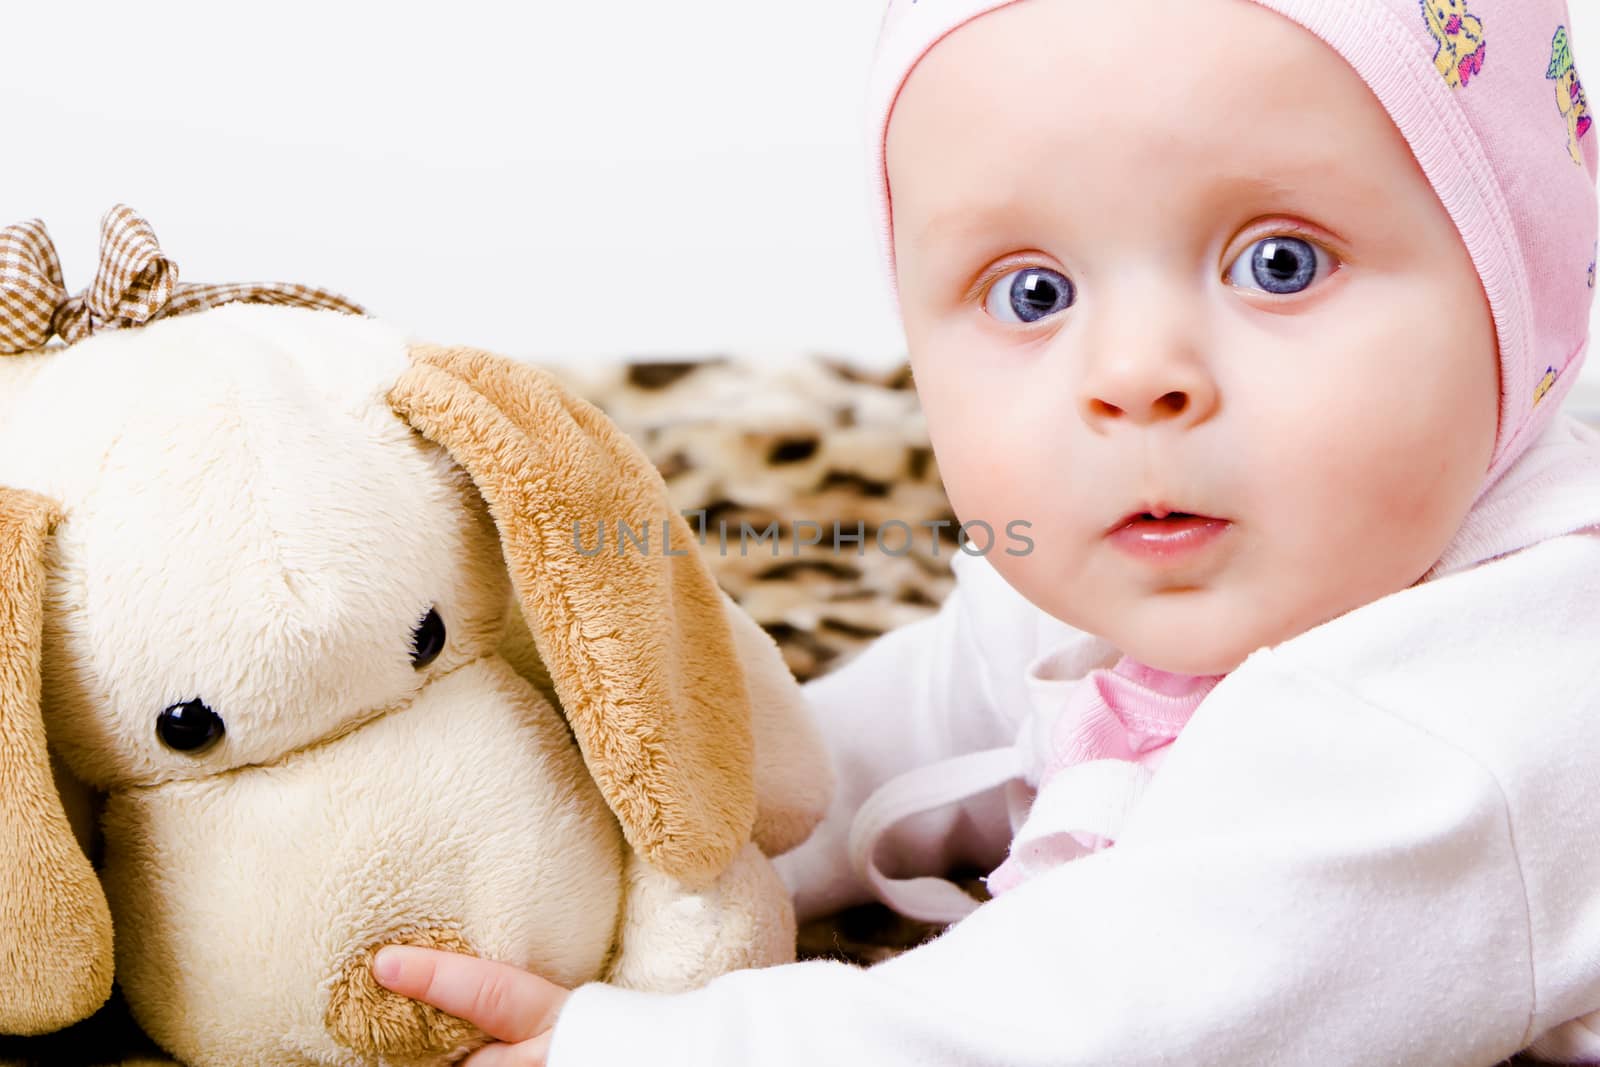 blue-eyed baby with a soft toy. studio photo. wonder